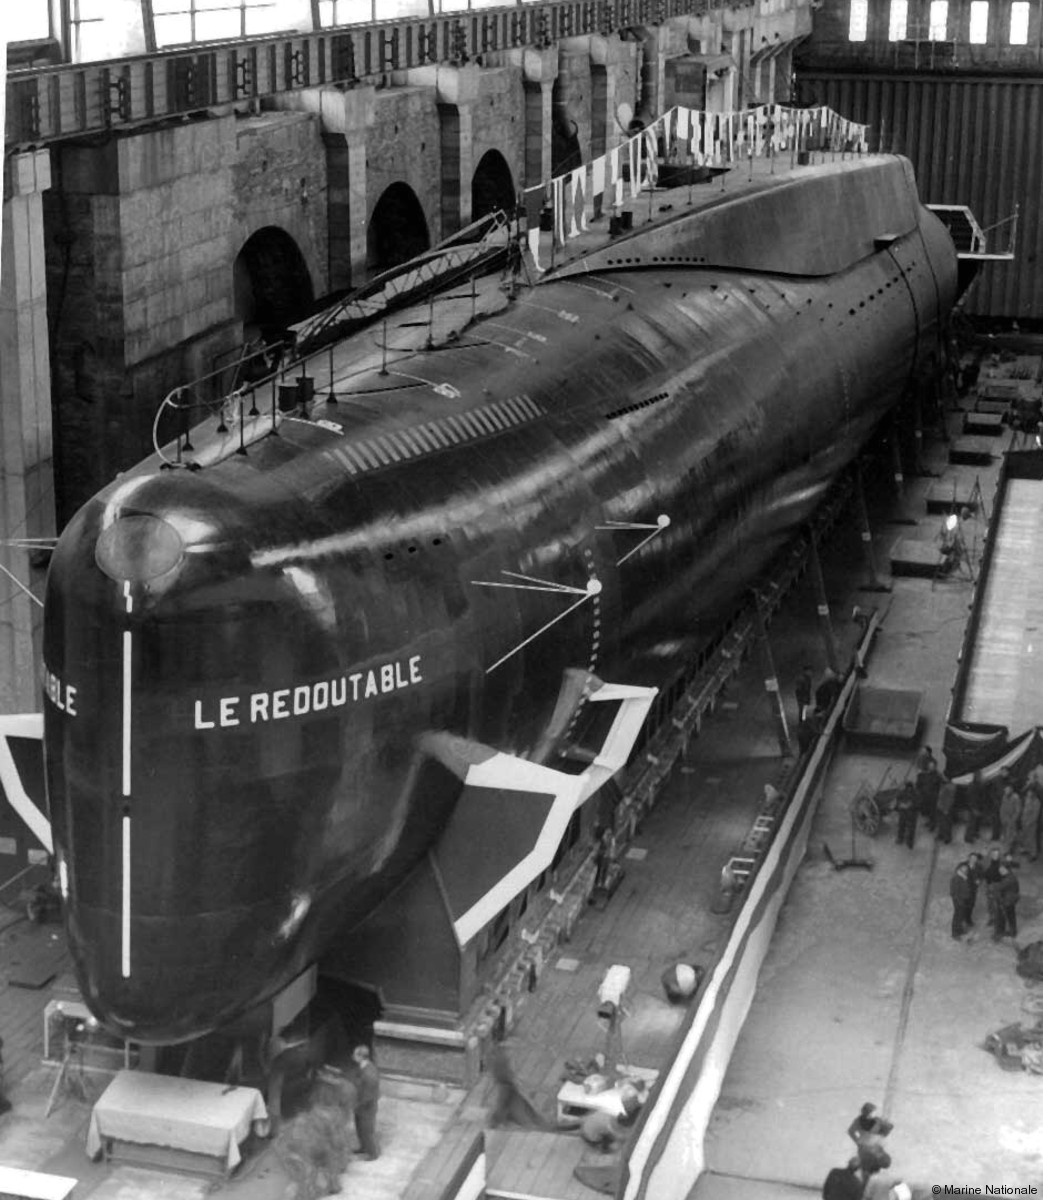 le redoutable class ballistic missile submarine ssbn snle french navy marine nationale terrible foudroyant indomptable tonnant inflexible 09